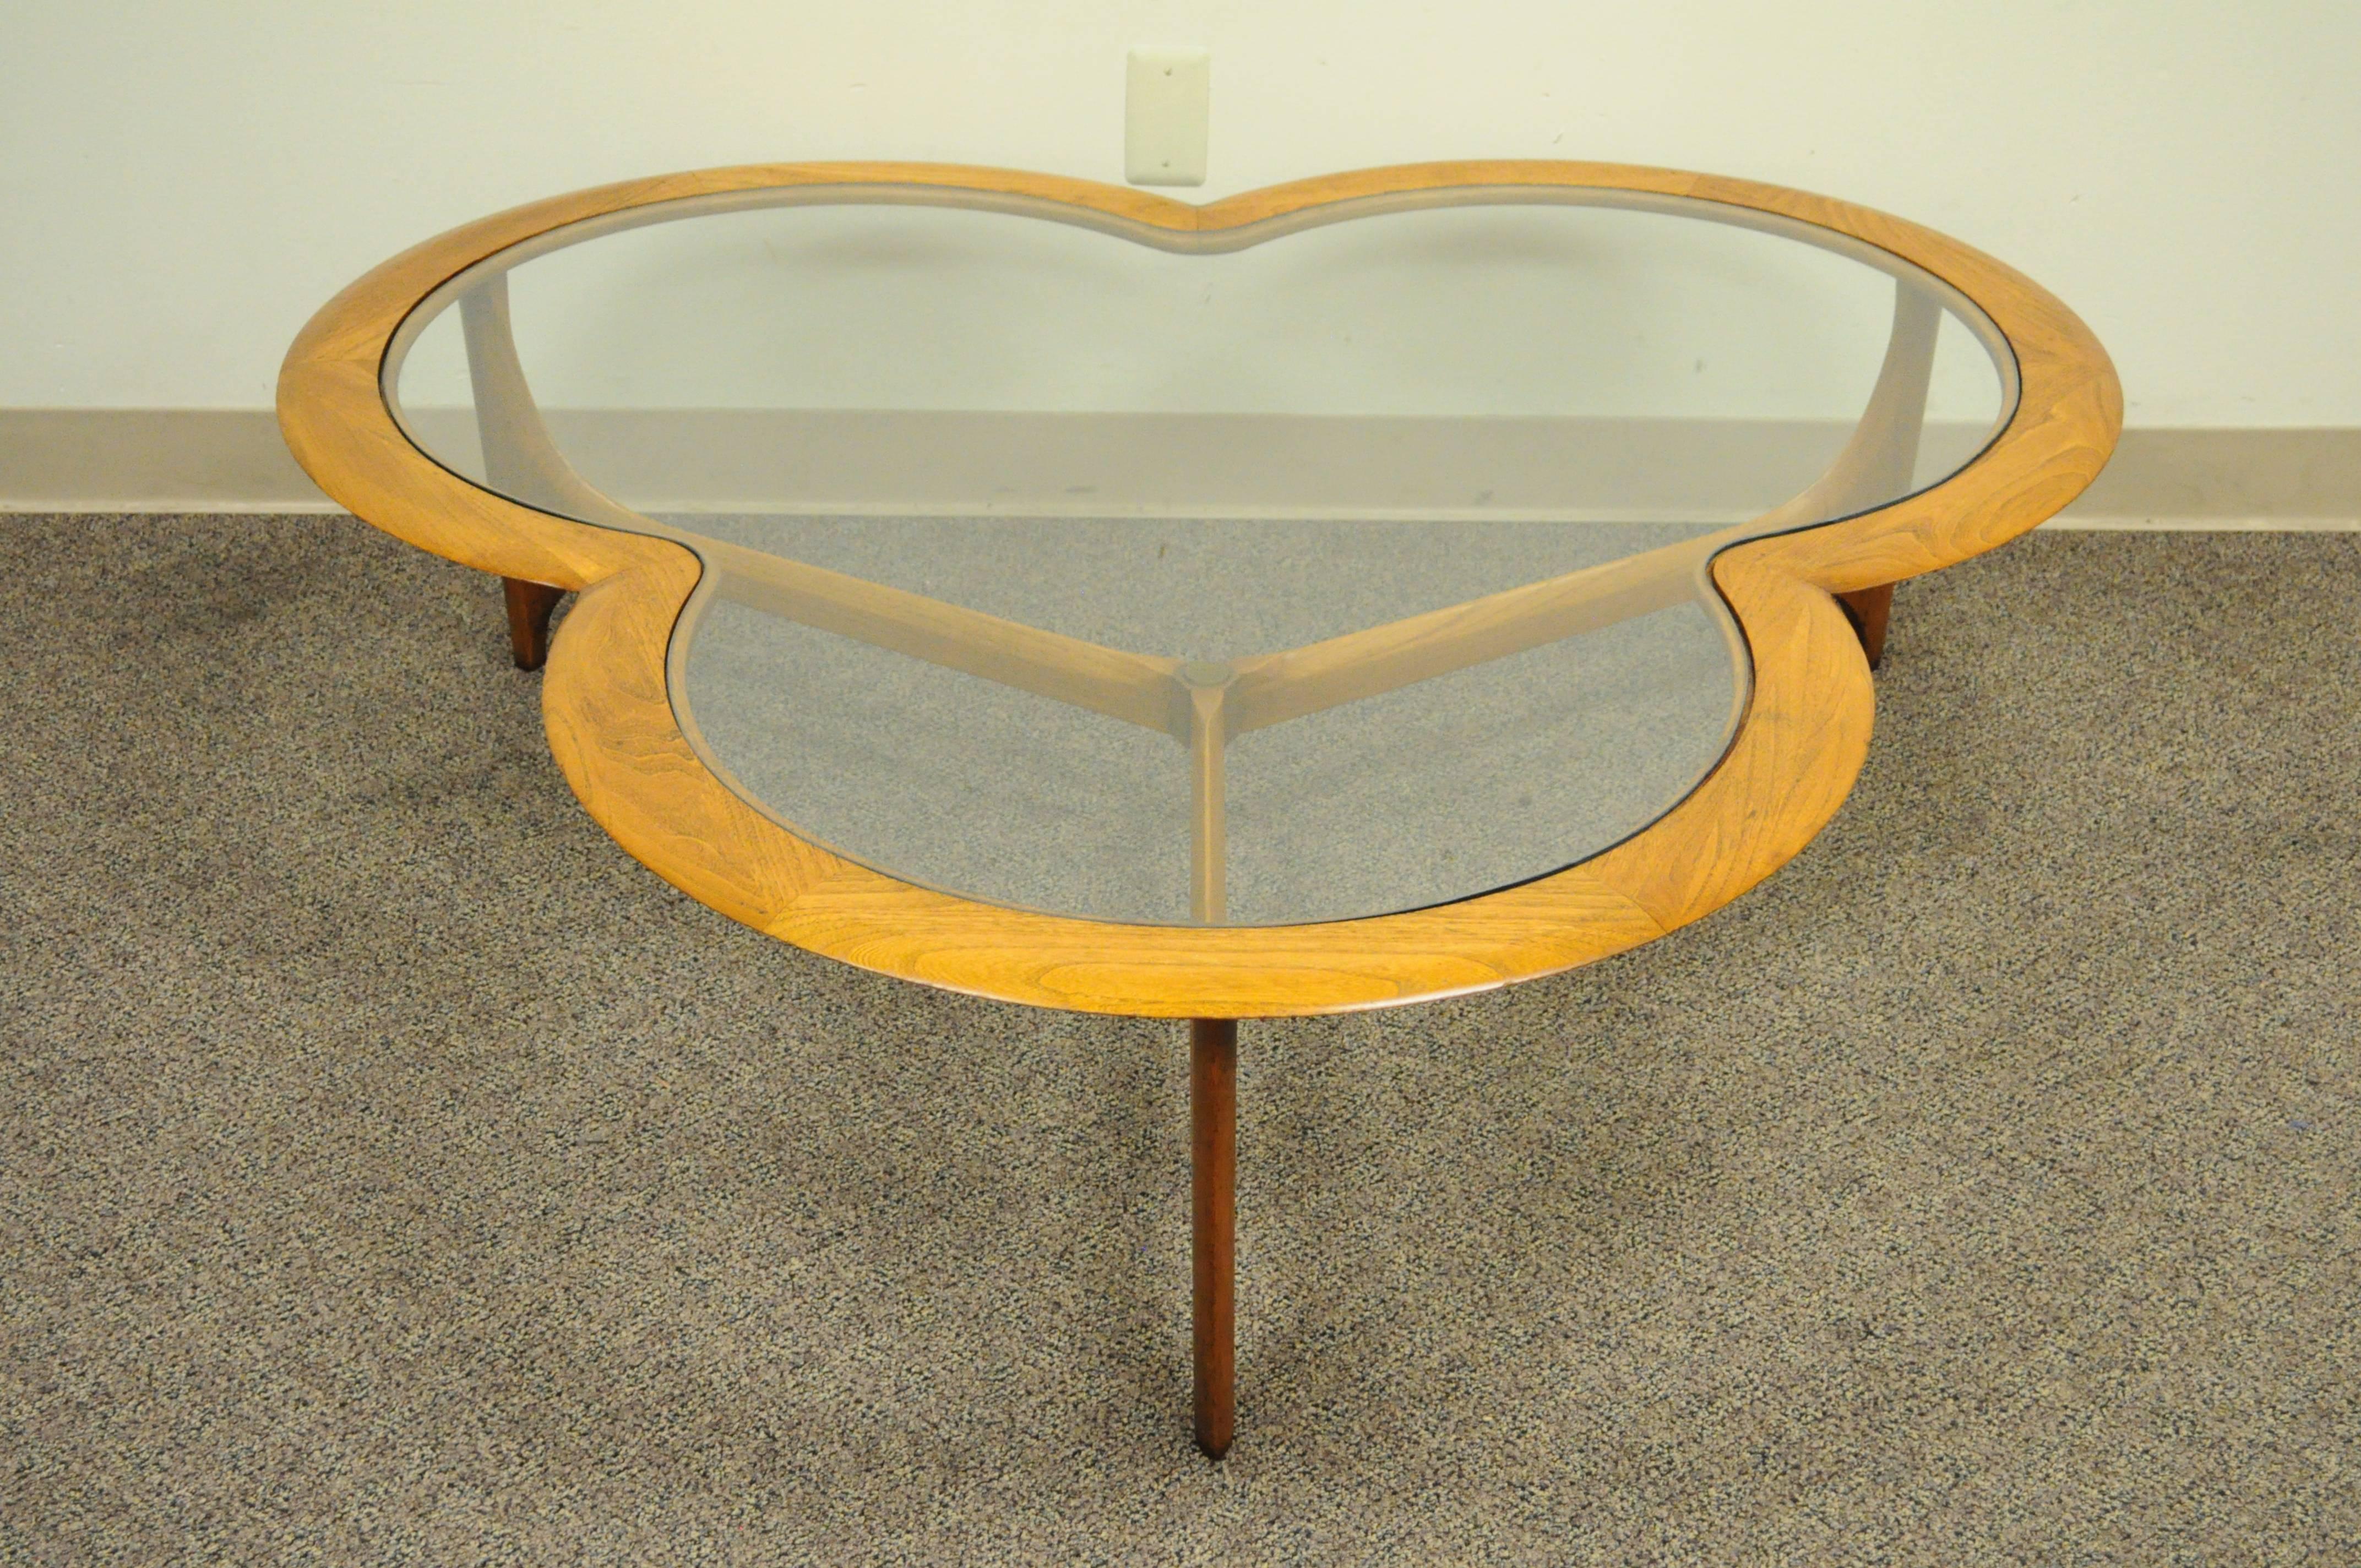 Large vintage lane three leaf clover Mid-Century Modern walnut coffee table. Item features an inset shaped glass top, sculptural three leg stretcher base with brass medallion, solid walnut frame, and great overall form.